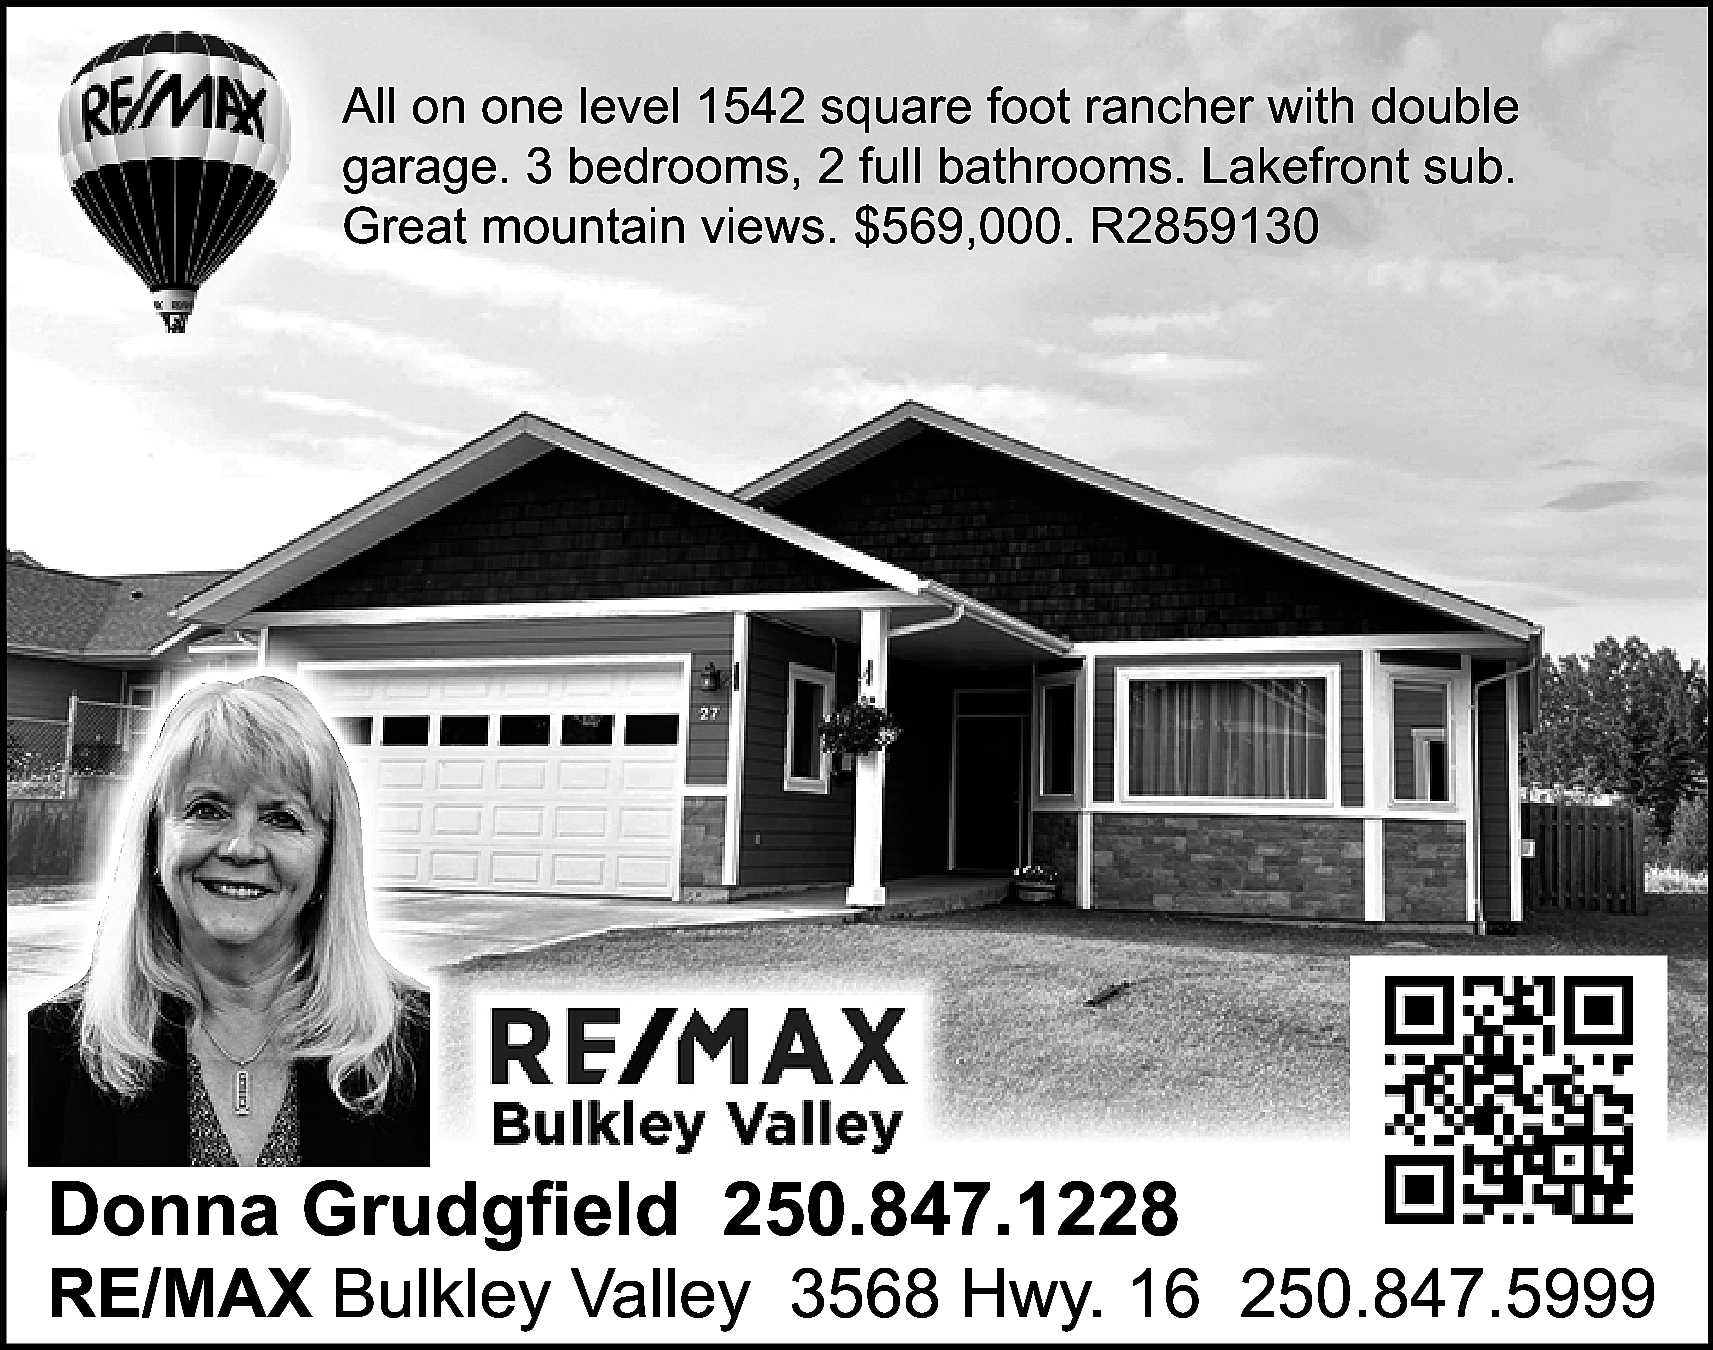 All on one level 1542  All on one level 1542 square foot rancher with double  garage. 3 bedrooms, 2 full bathrooms. Lakefront sub.  Great mountain views. $569,000. R2859130    Donna Grudgfield 250.847.1228    RE/MAX Bulkley Valley 3568 Hwy. 16 250.847.5999    